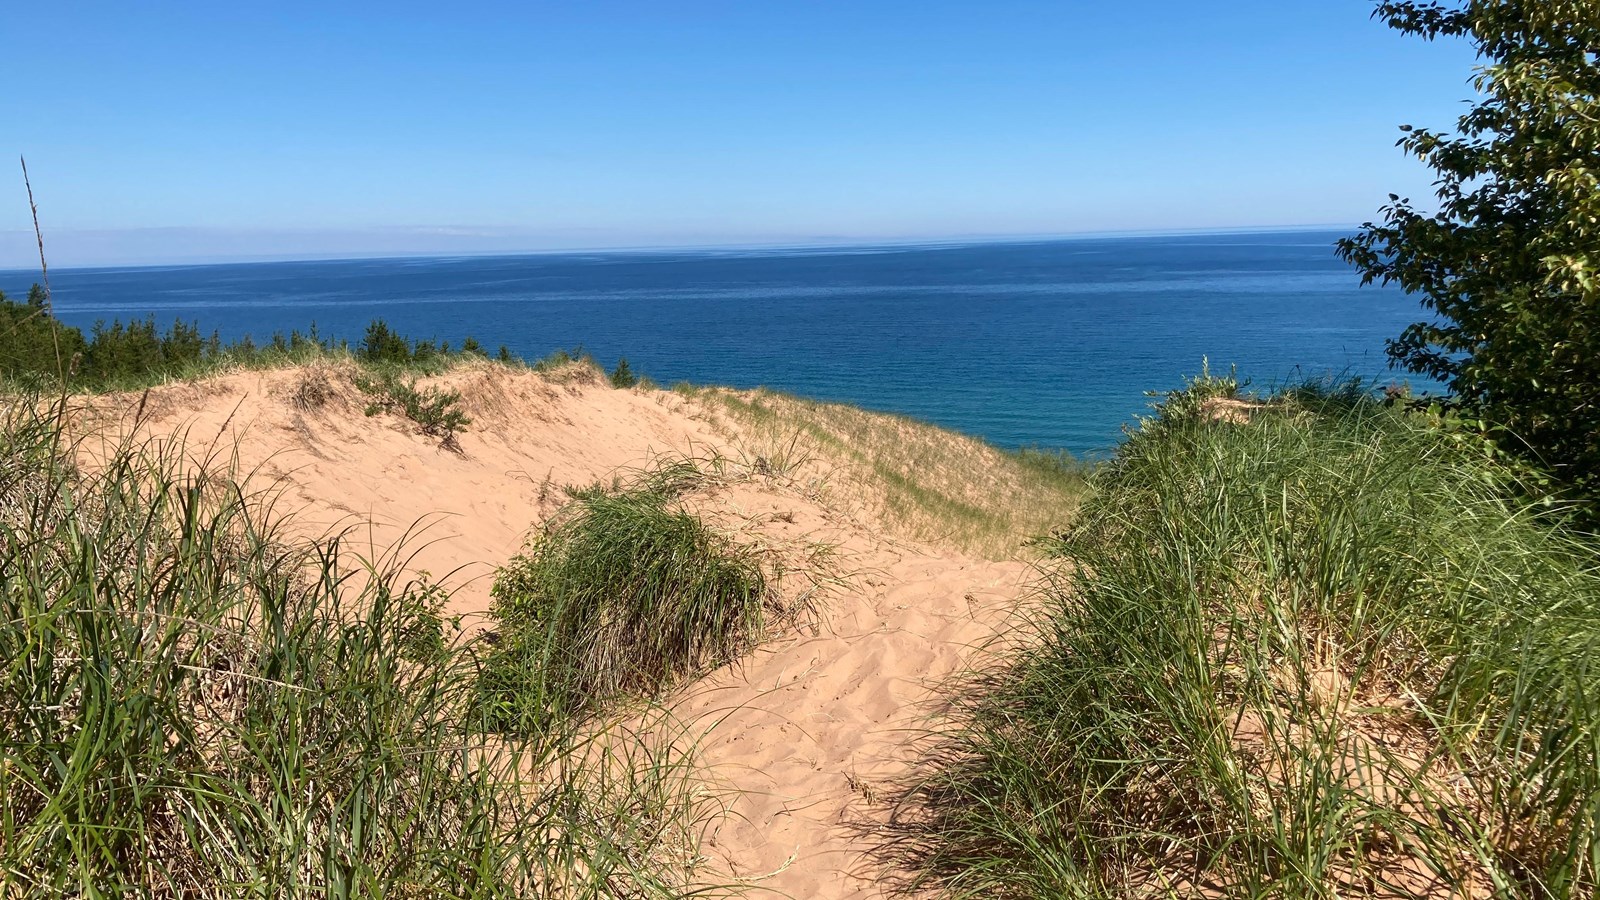 A trail through grass-covered sand dunes leads to a view of Lake Superior in the distance.